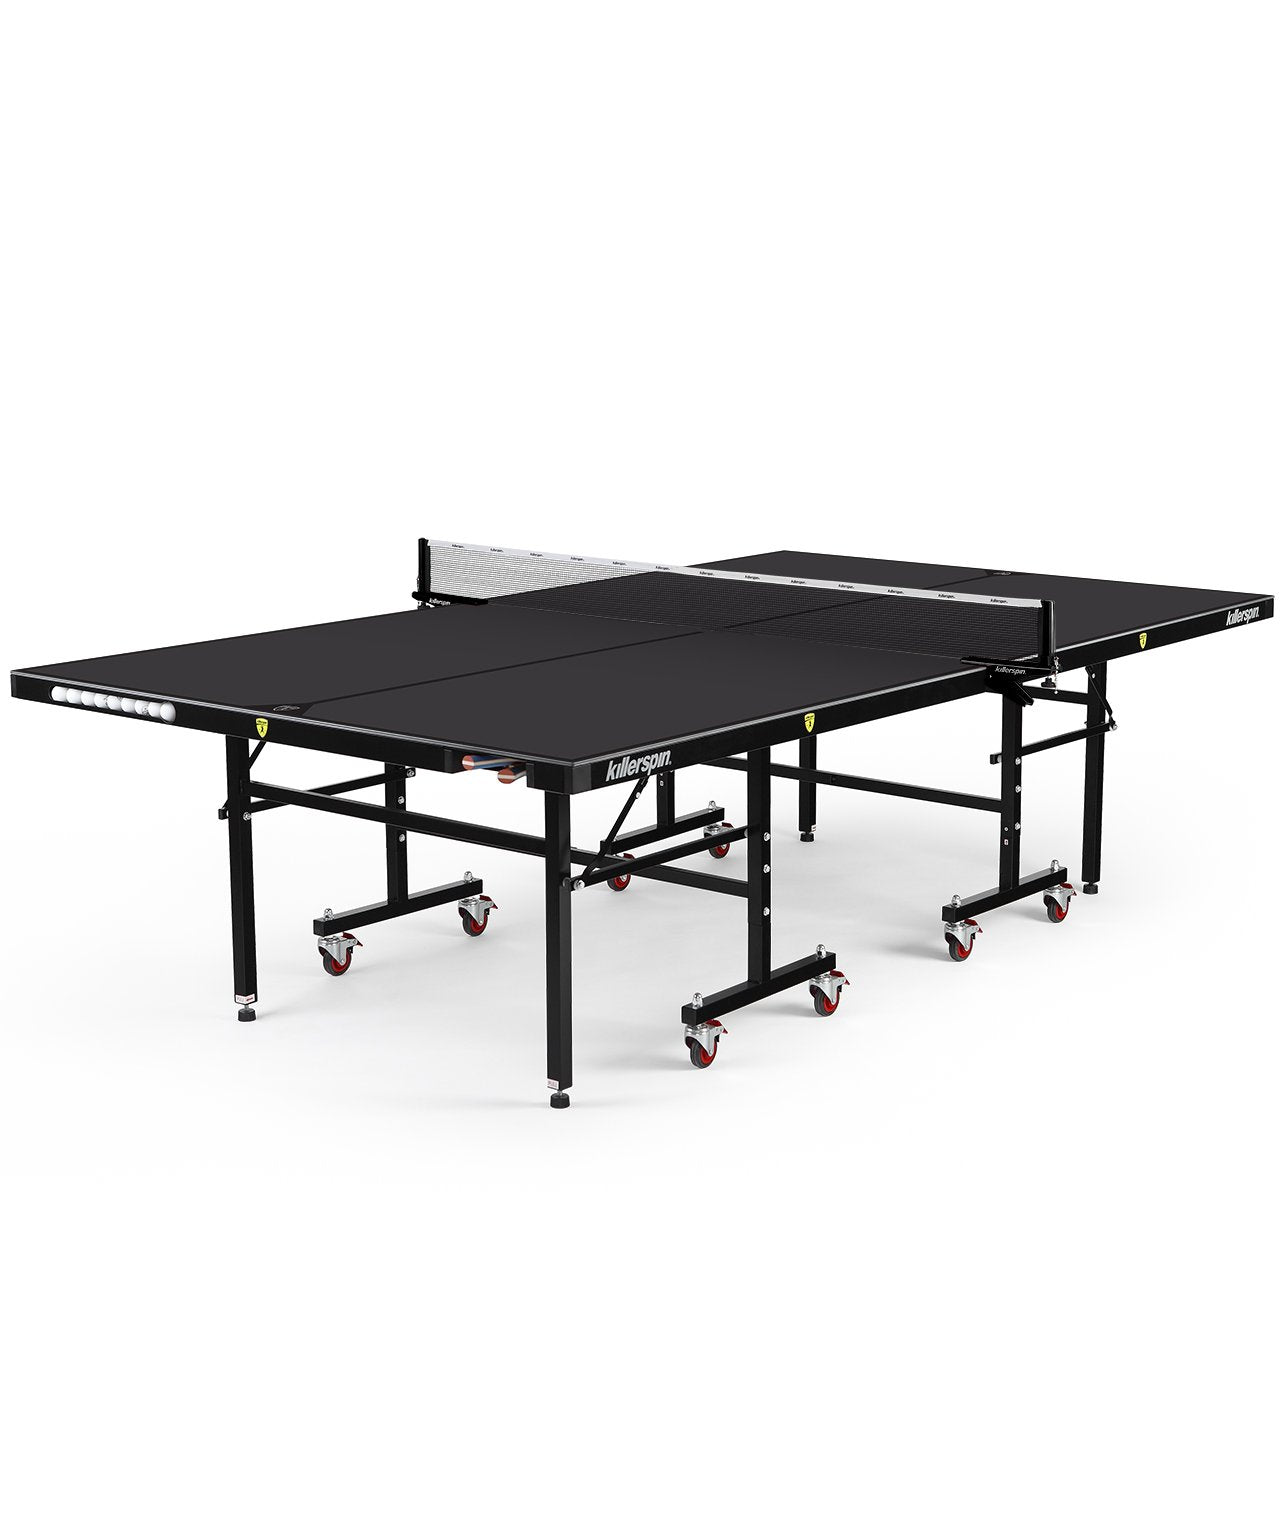 Outdoor Ping Pong Table with Storage Pockets - MyT7 BlackStorm by Killerspin - Gym Gear Direct